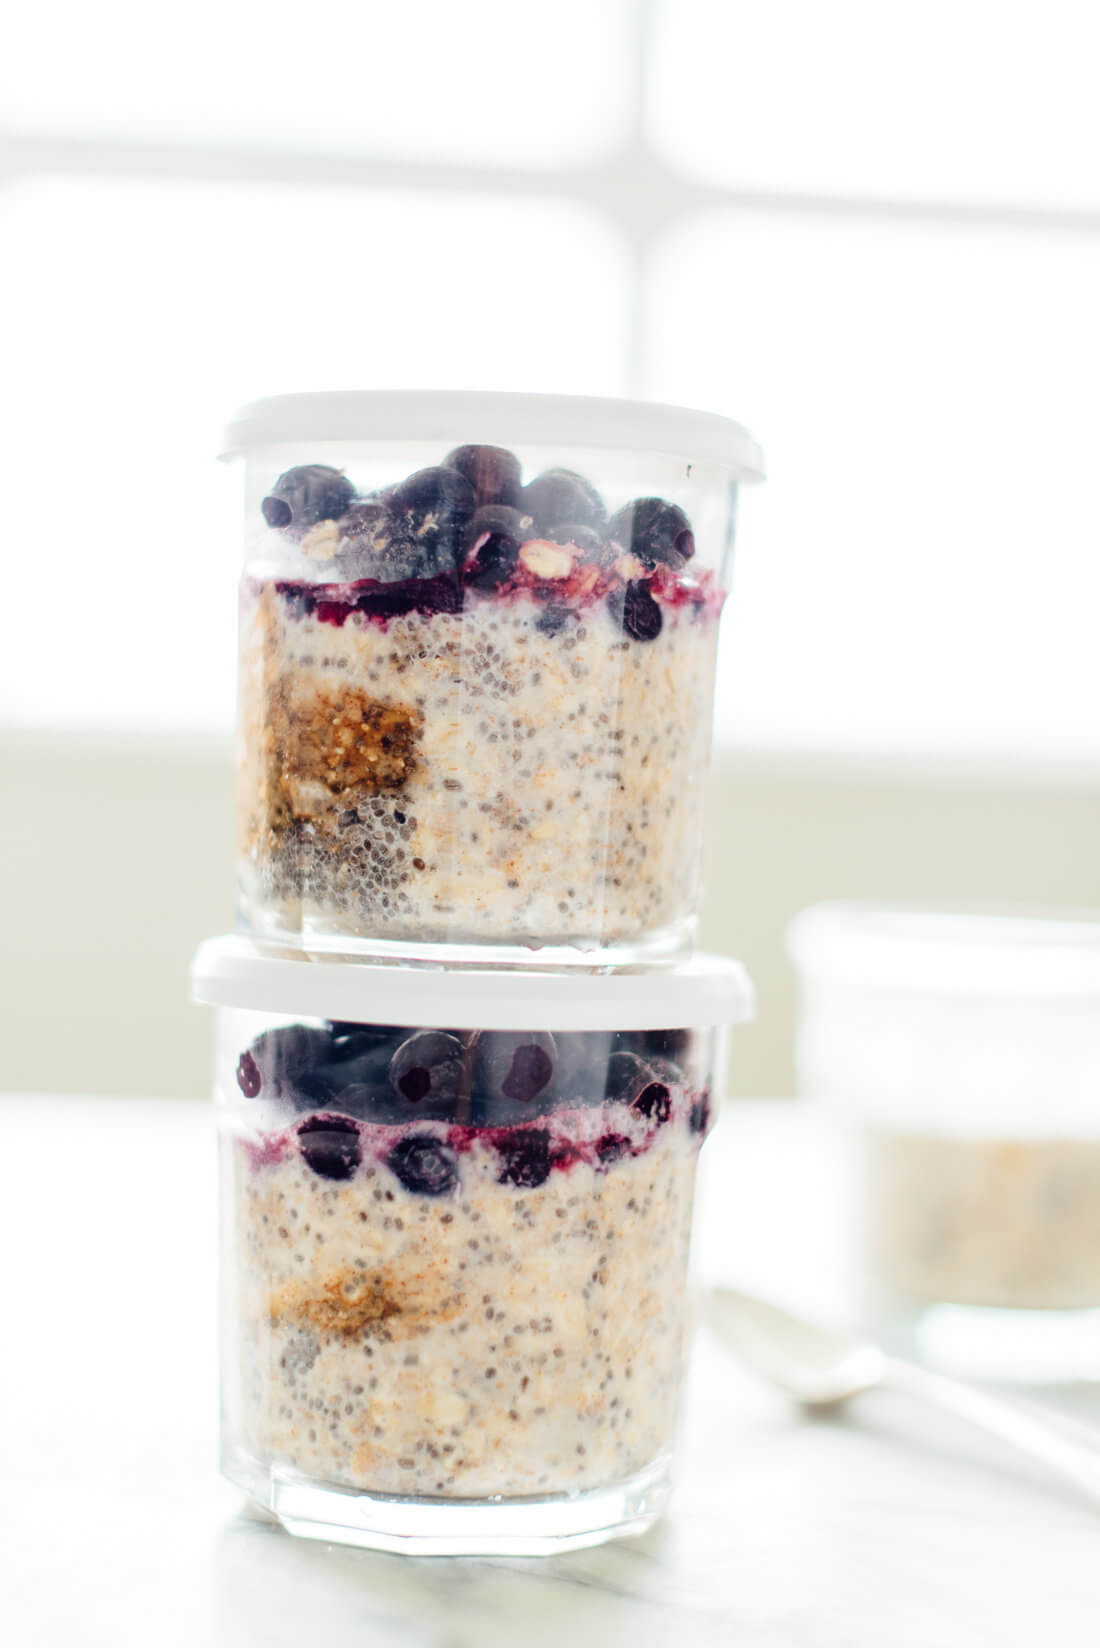 Design your own overnight oats! Learn how to make your ideal overnight oats (and make enough to last through the week) at cookieandkate.com